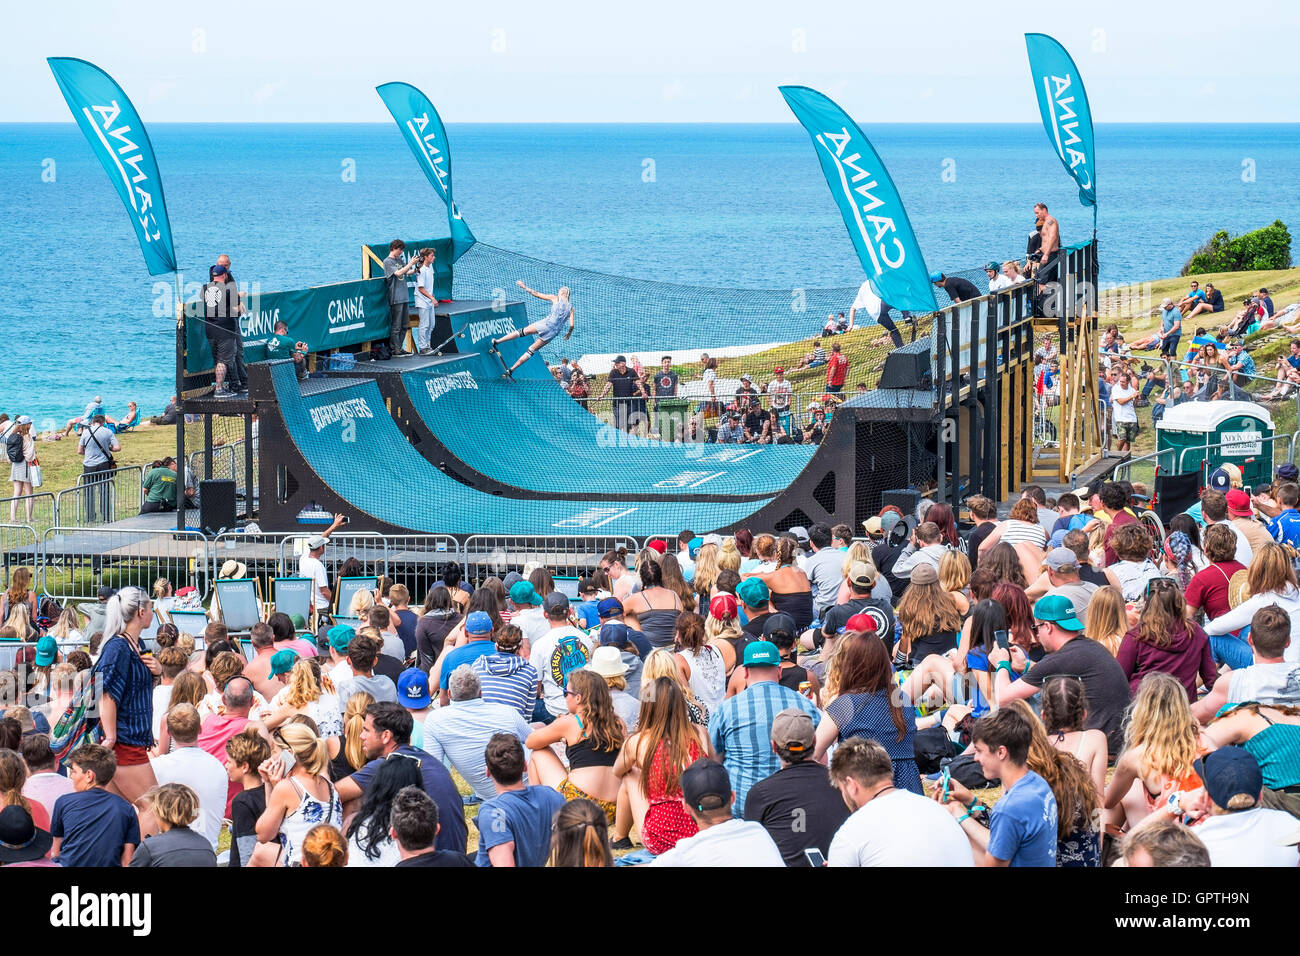 people watching the skate boarding at the annual boardmasters competition in newquay, cornwall, uk Stock Photo